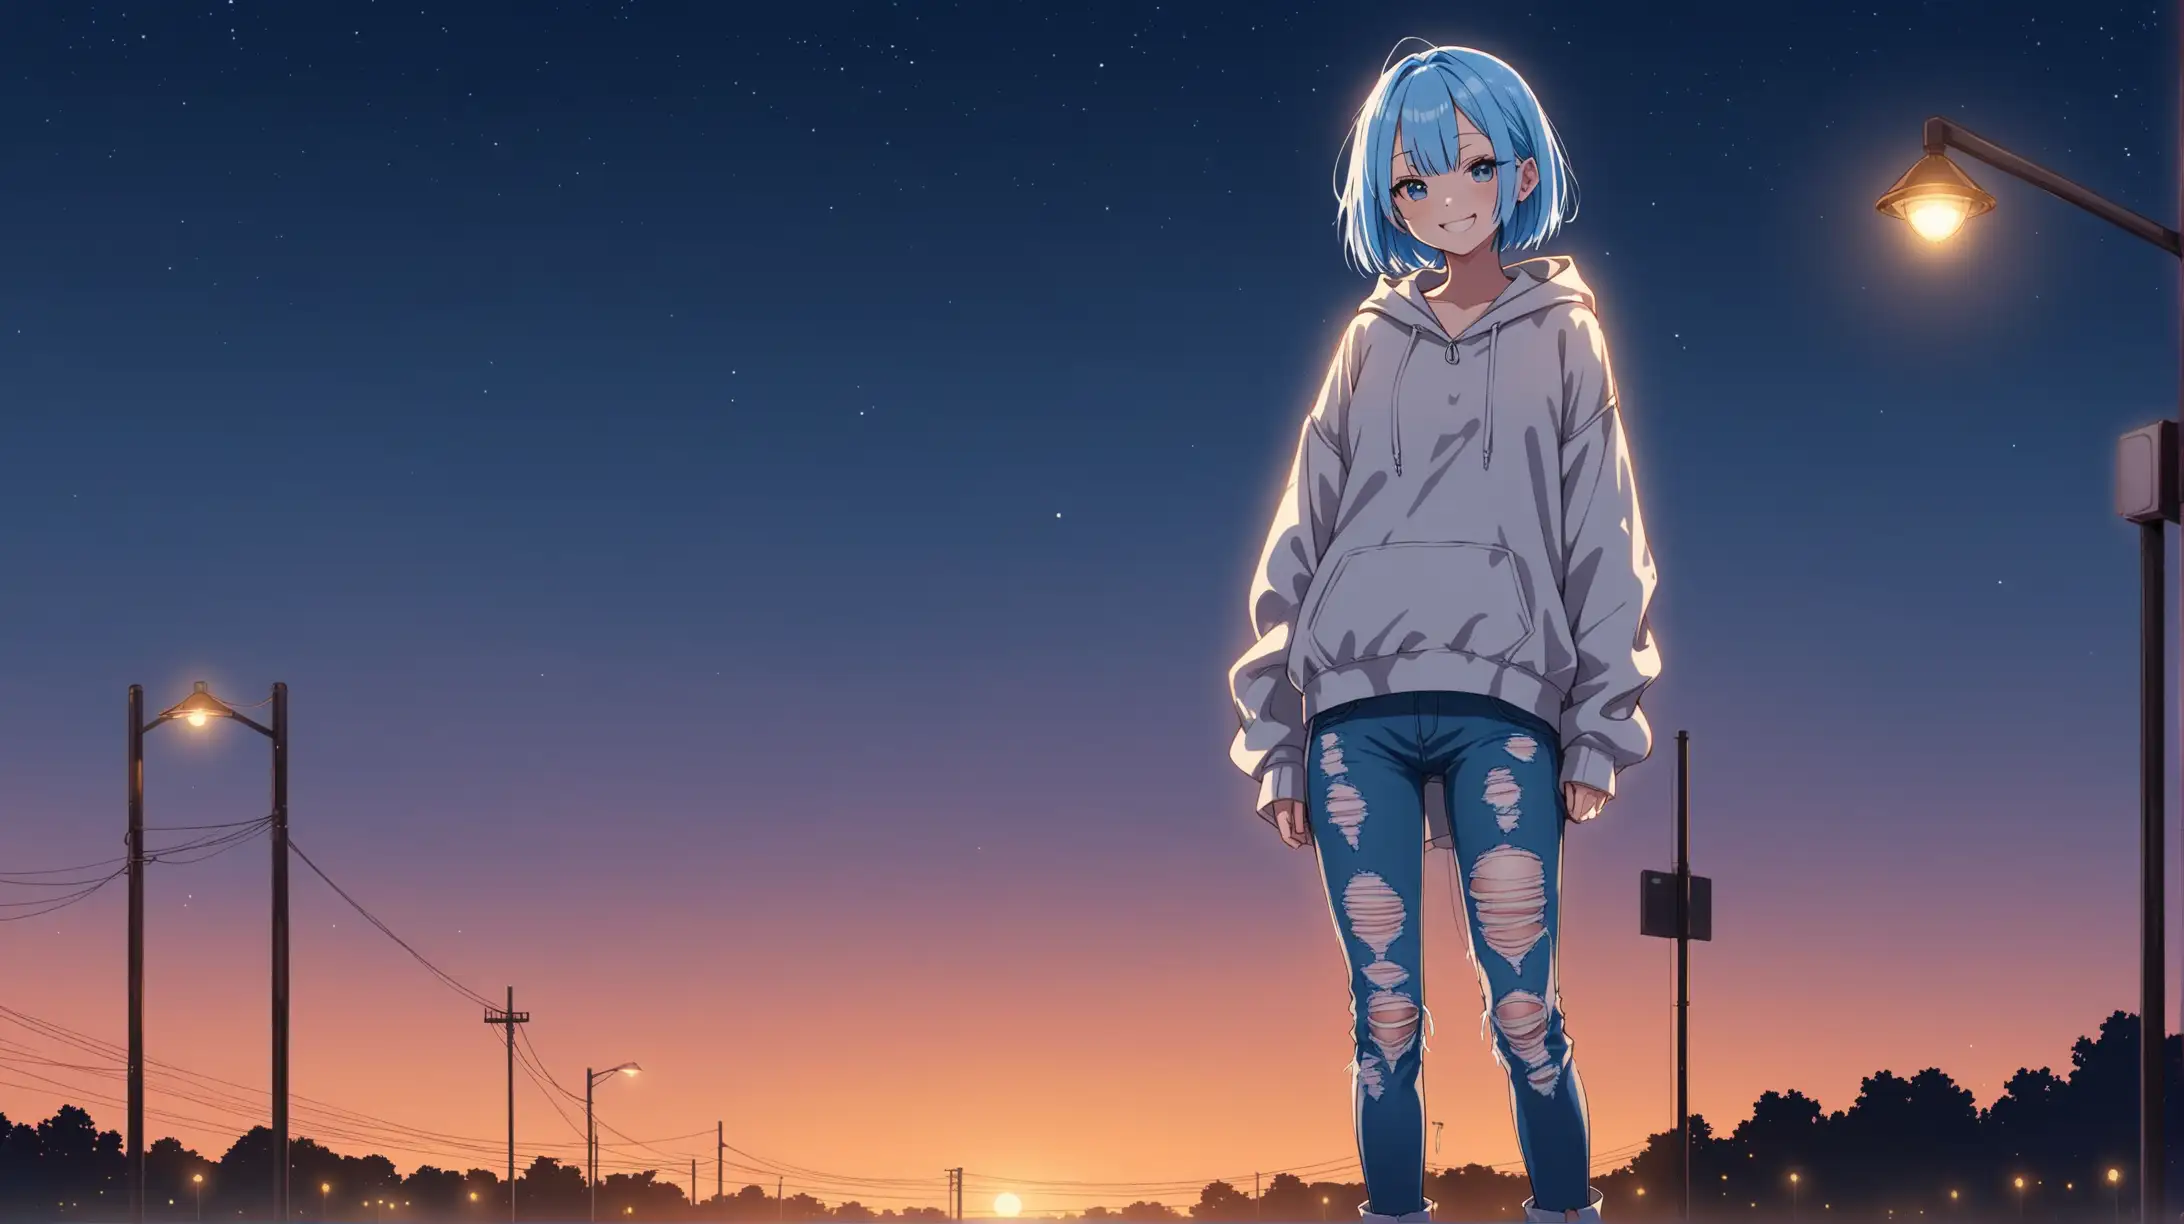 Draw the character Rem standing alone outside in the evening while she is wearing ripped jeans and a hooded jacket and smiling at the viewer